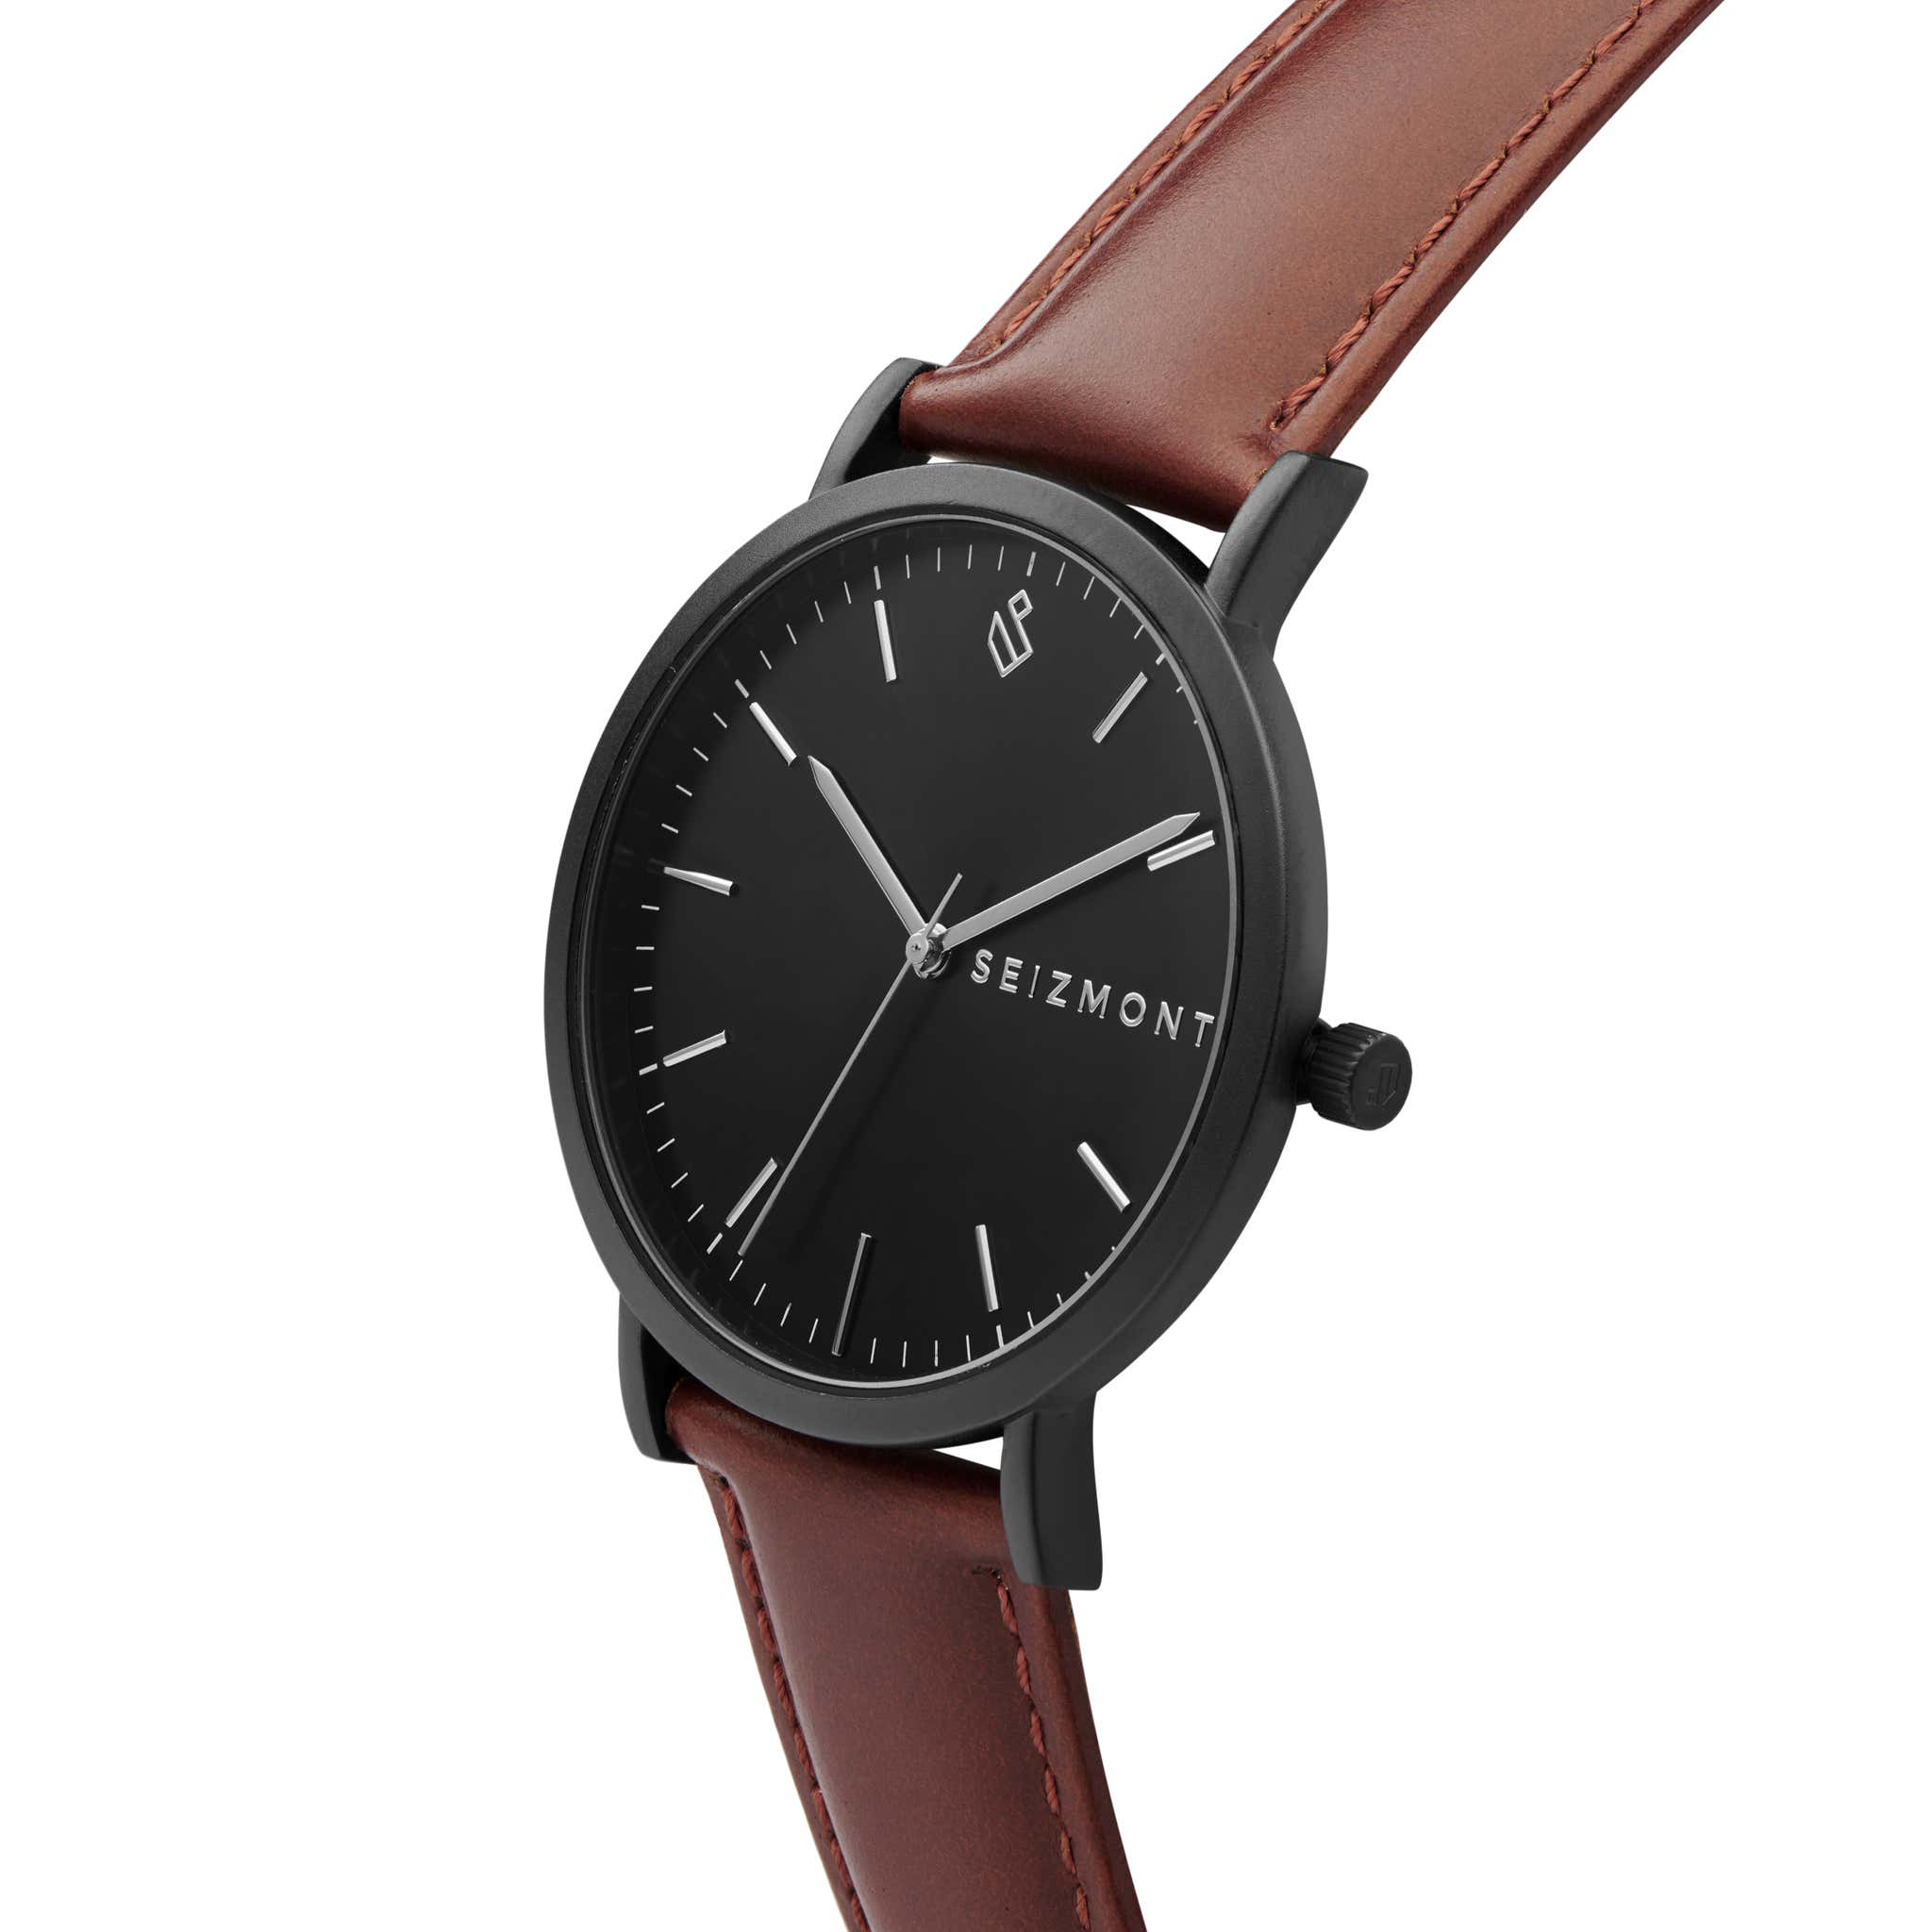 Lucas Moment Watch | Seizmont | Free shipping over $99